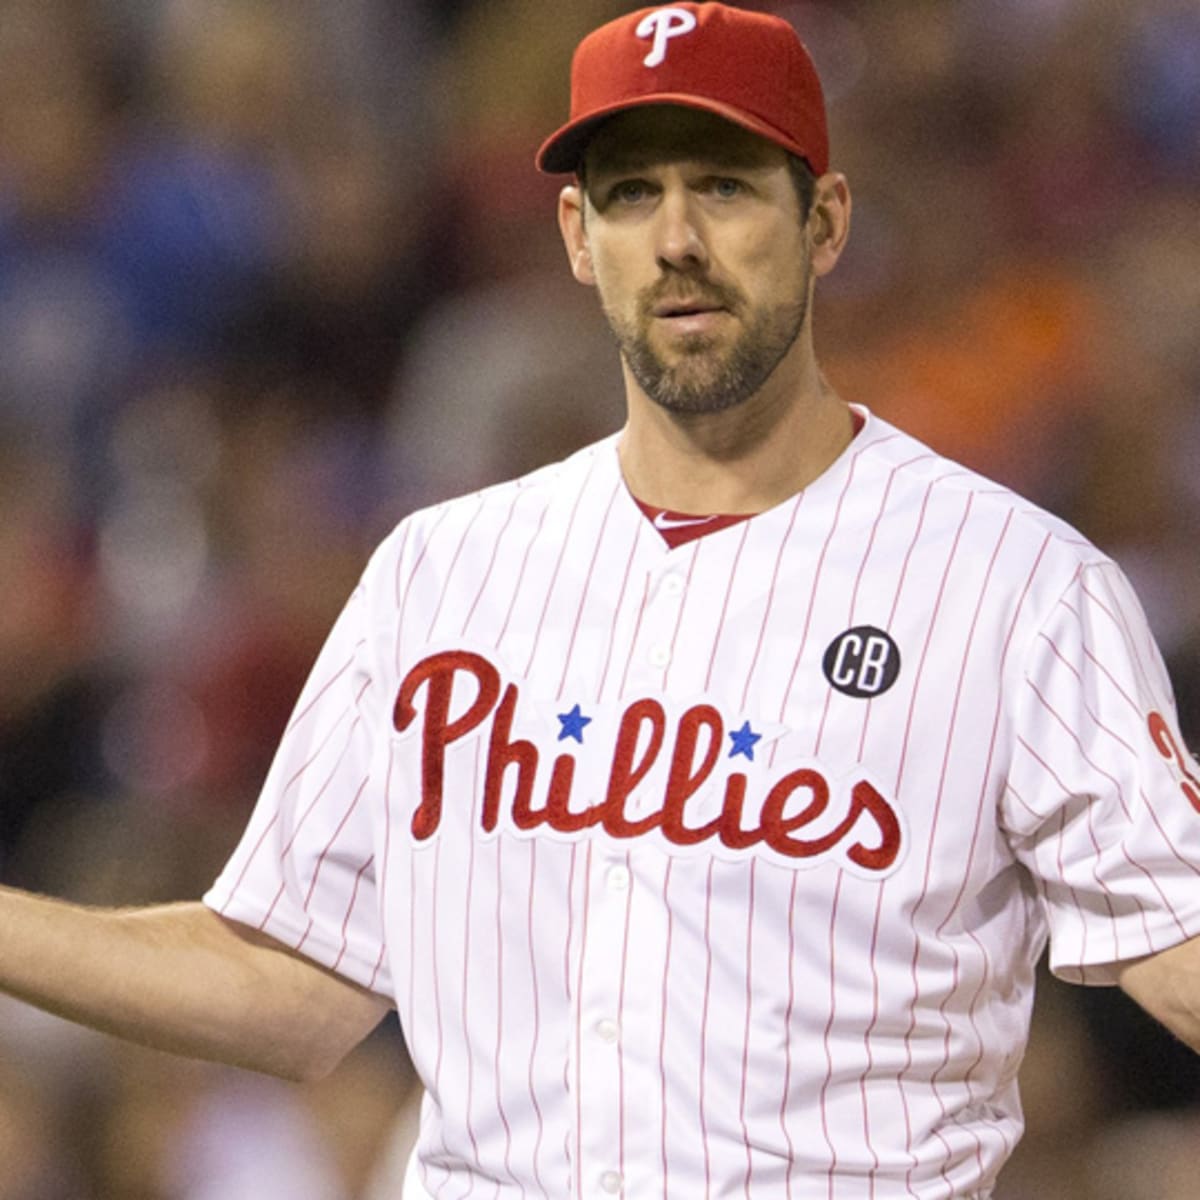 Phillies' Cliff Lee faces end of career after elbow injury return